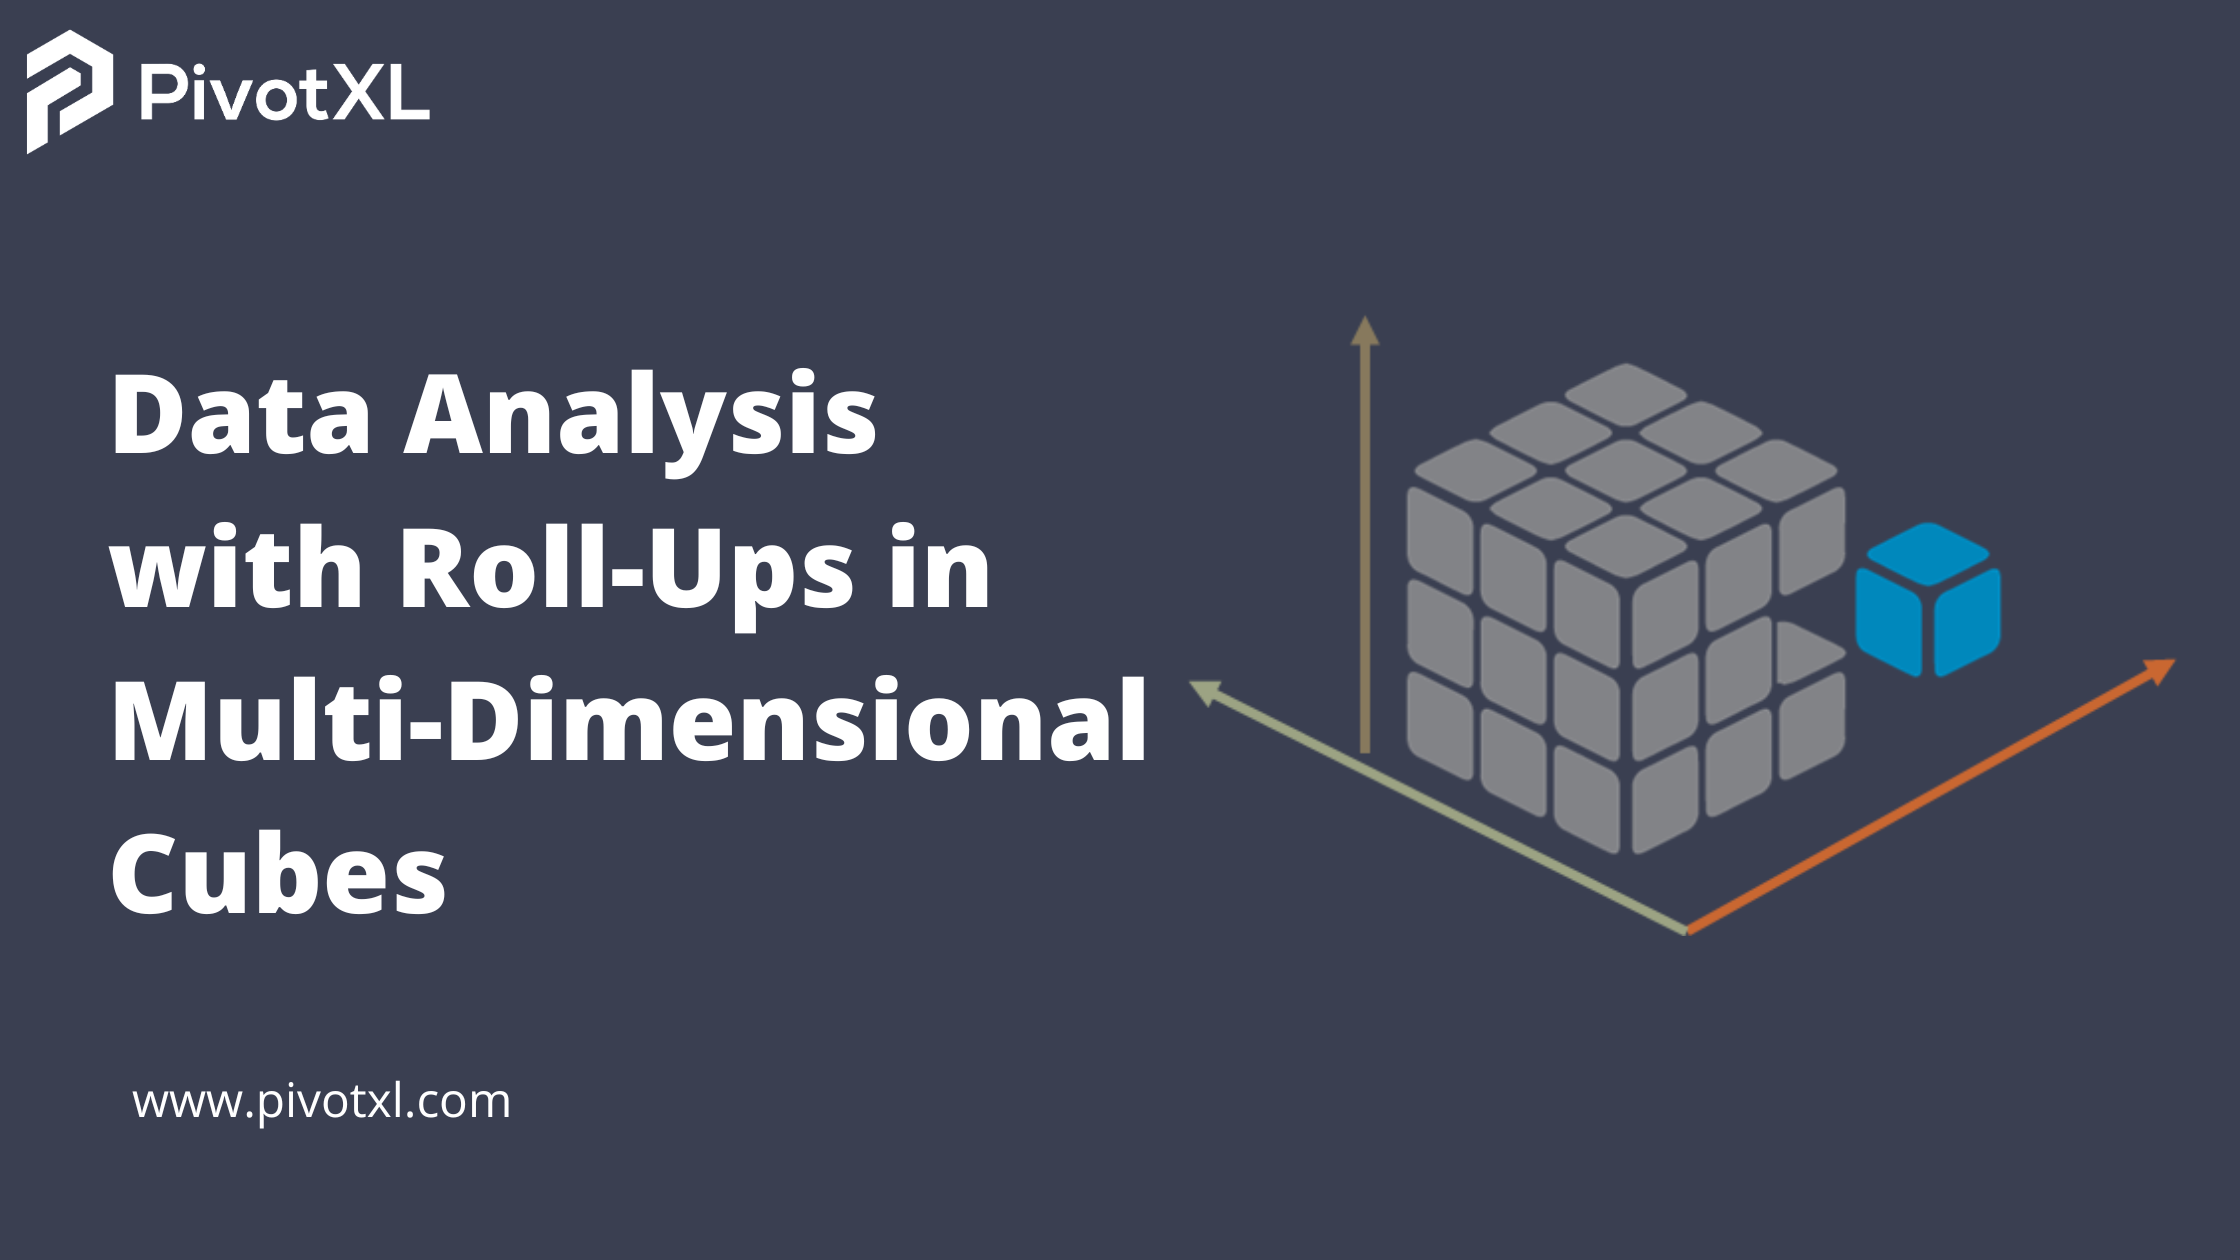 Data Analysis with Roll-Ups in Multi-Dimensional Cubes